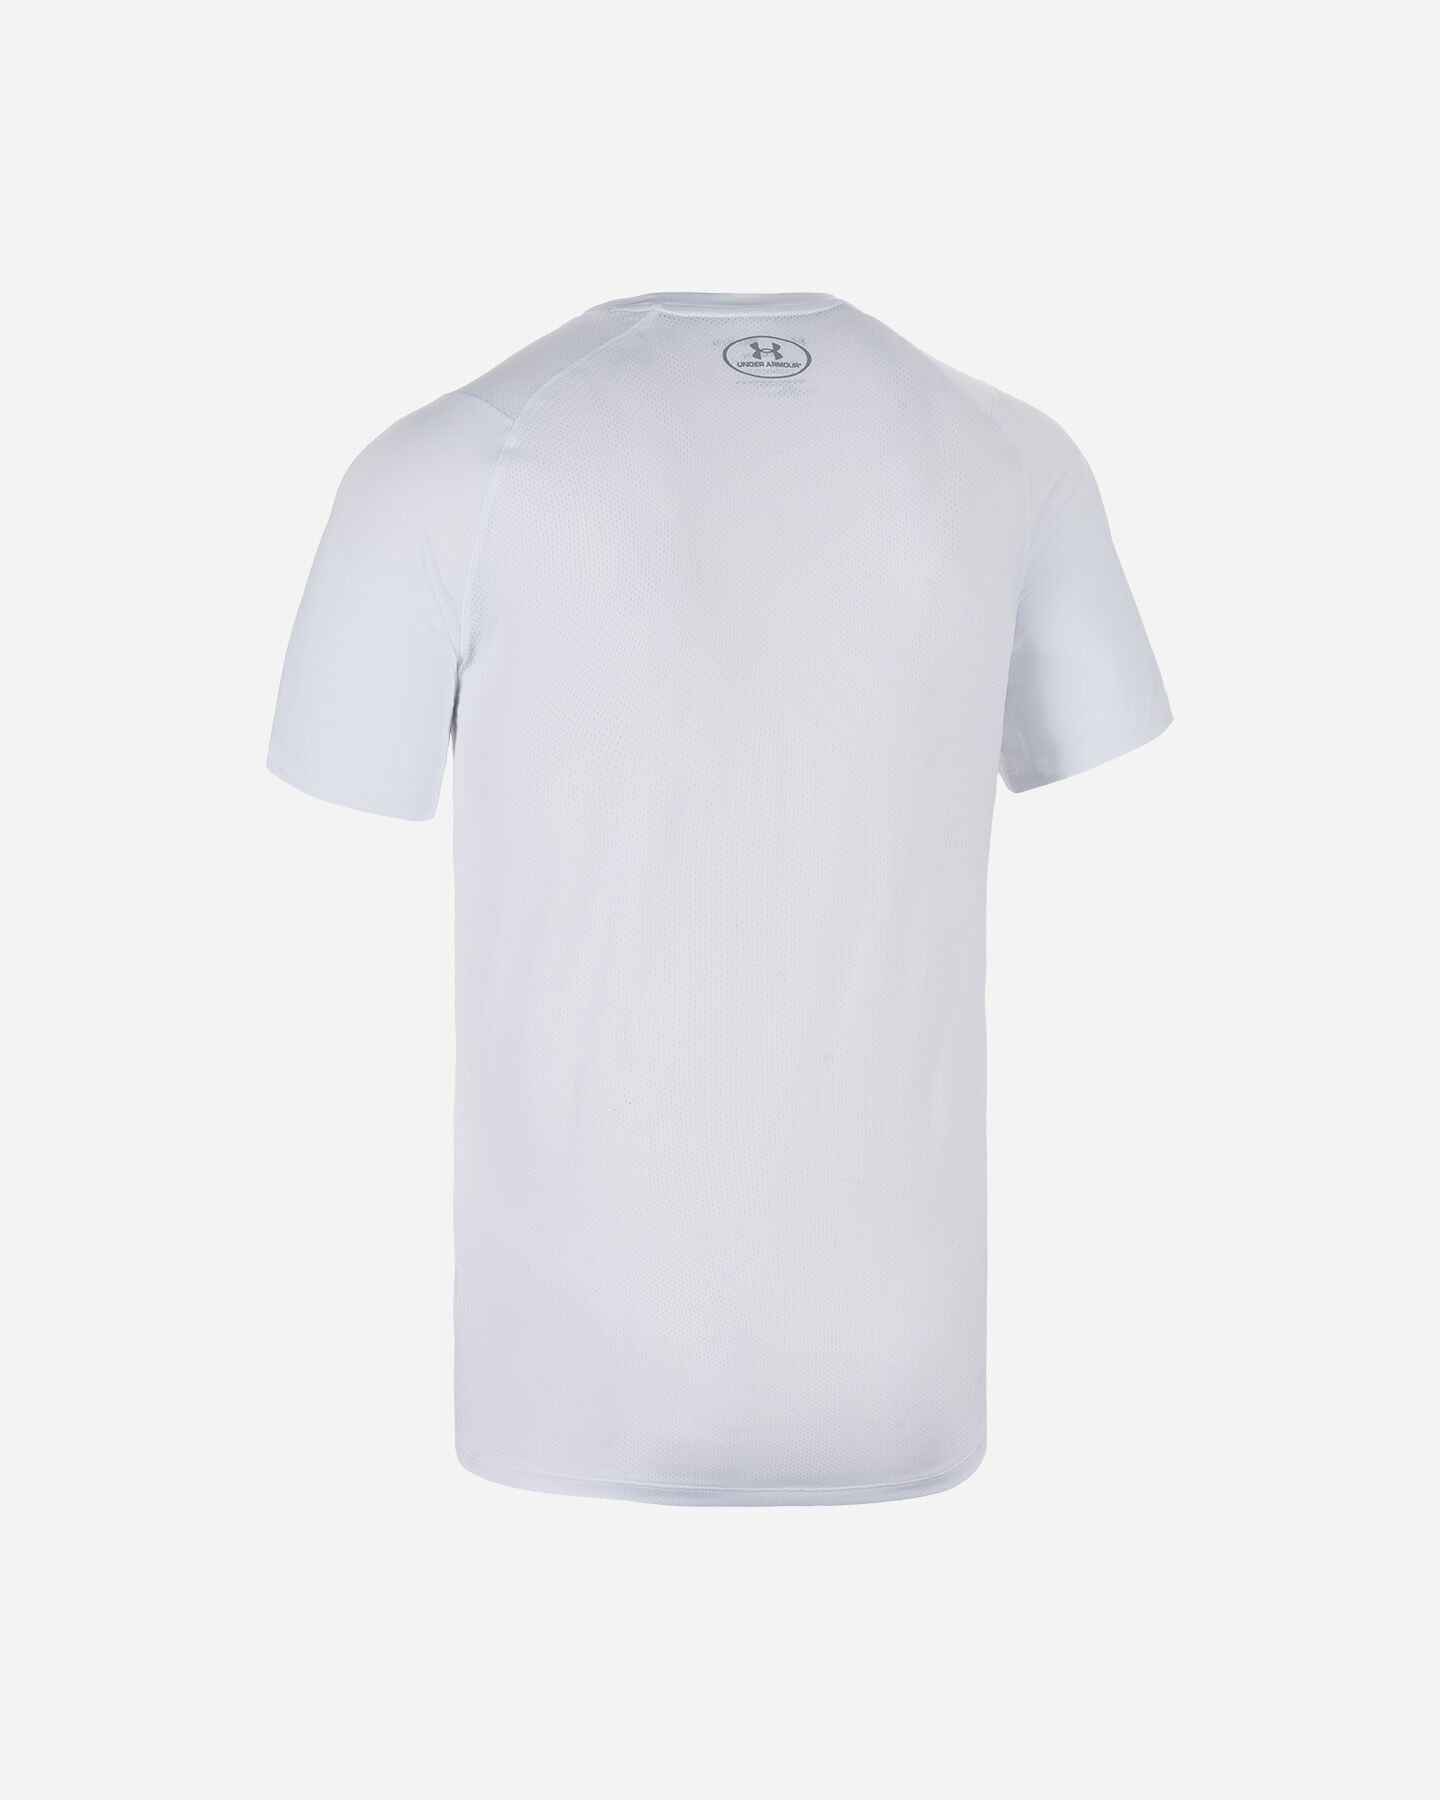  T-Shirt training UNDER ARMOUR MK-1 M S2025353|0100|XS scatto 1